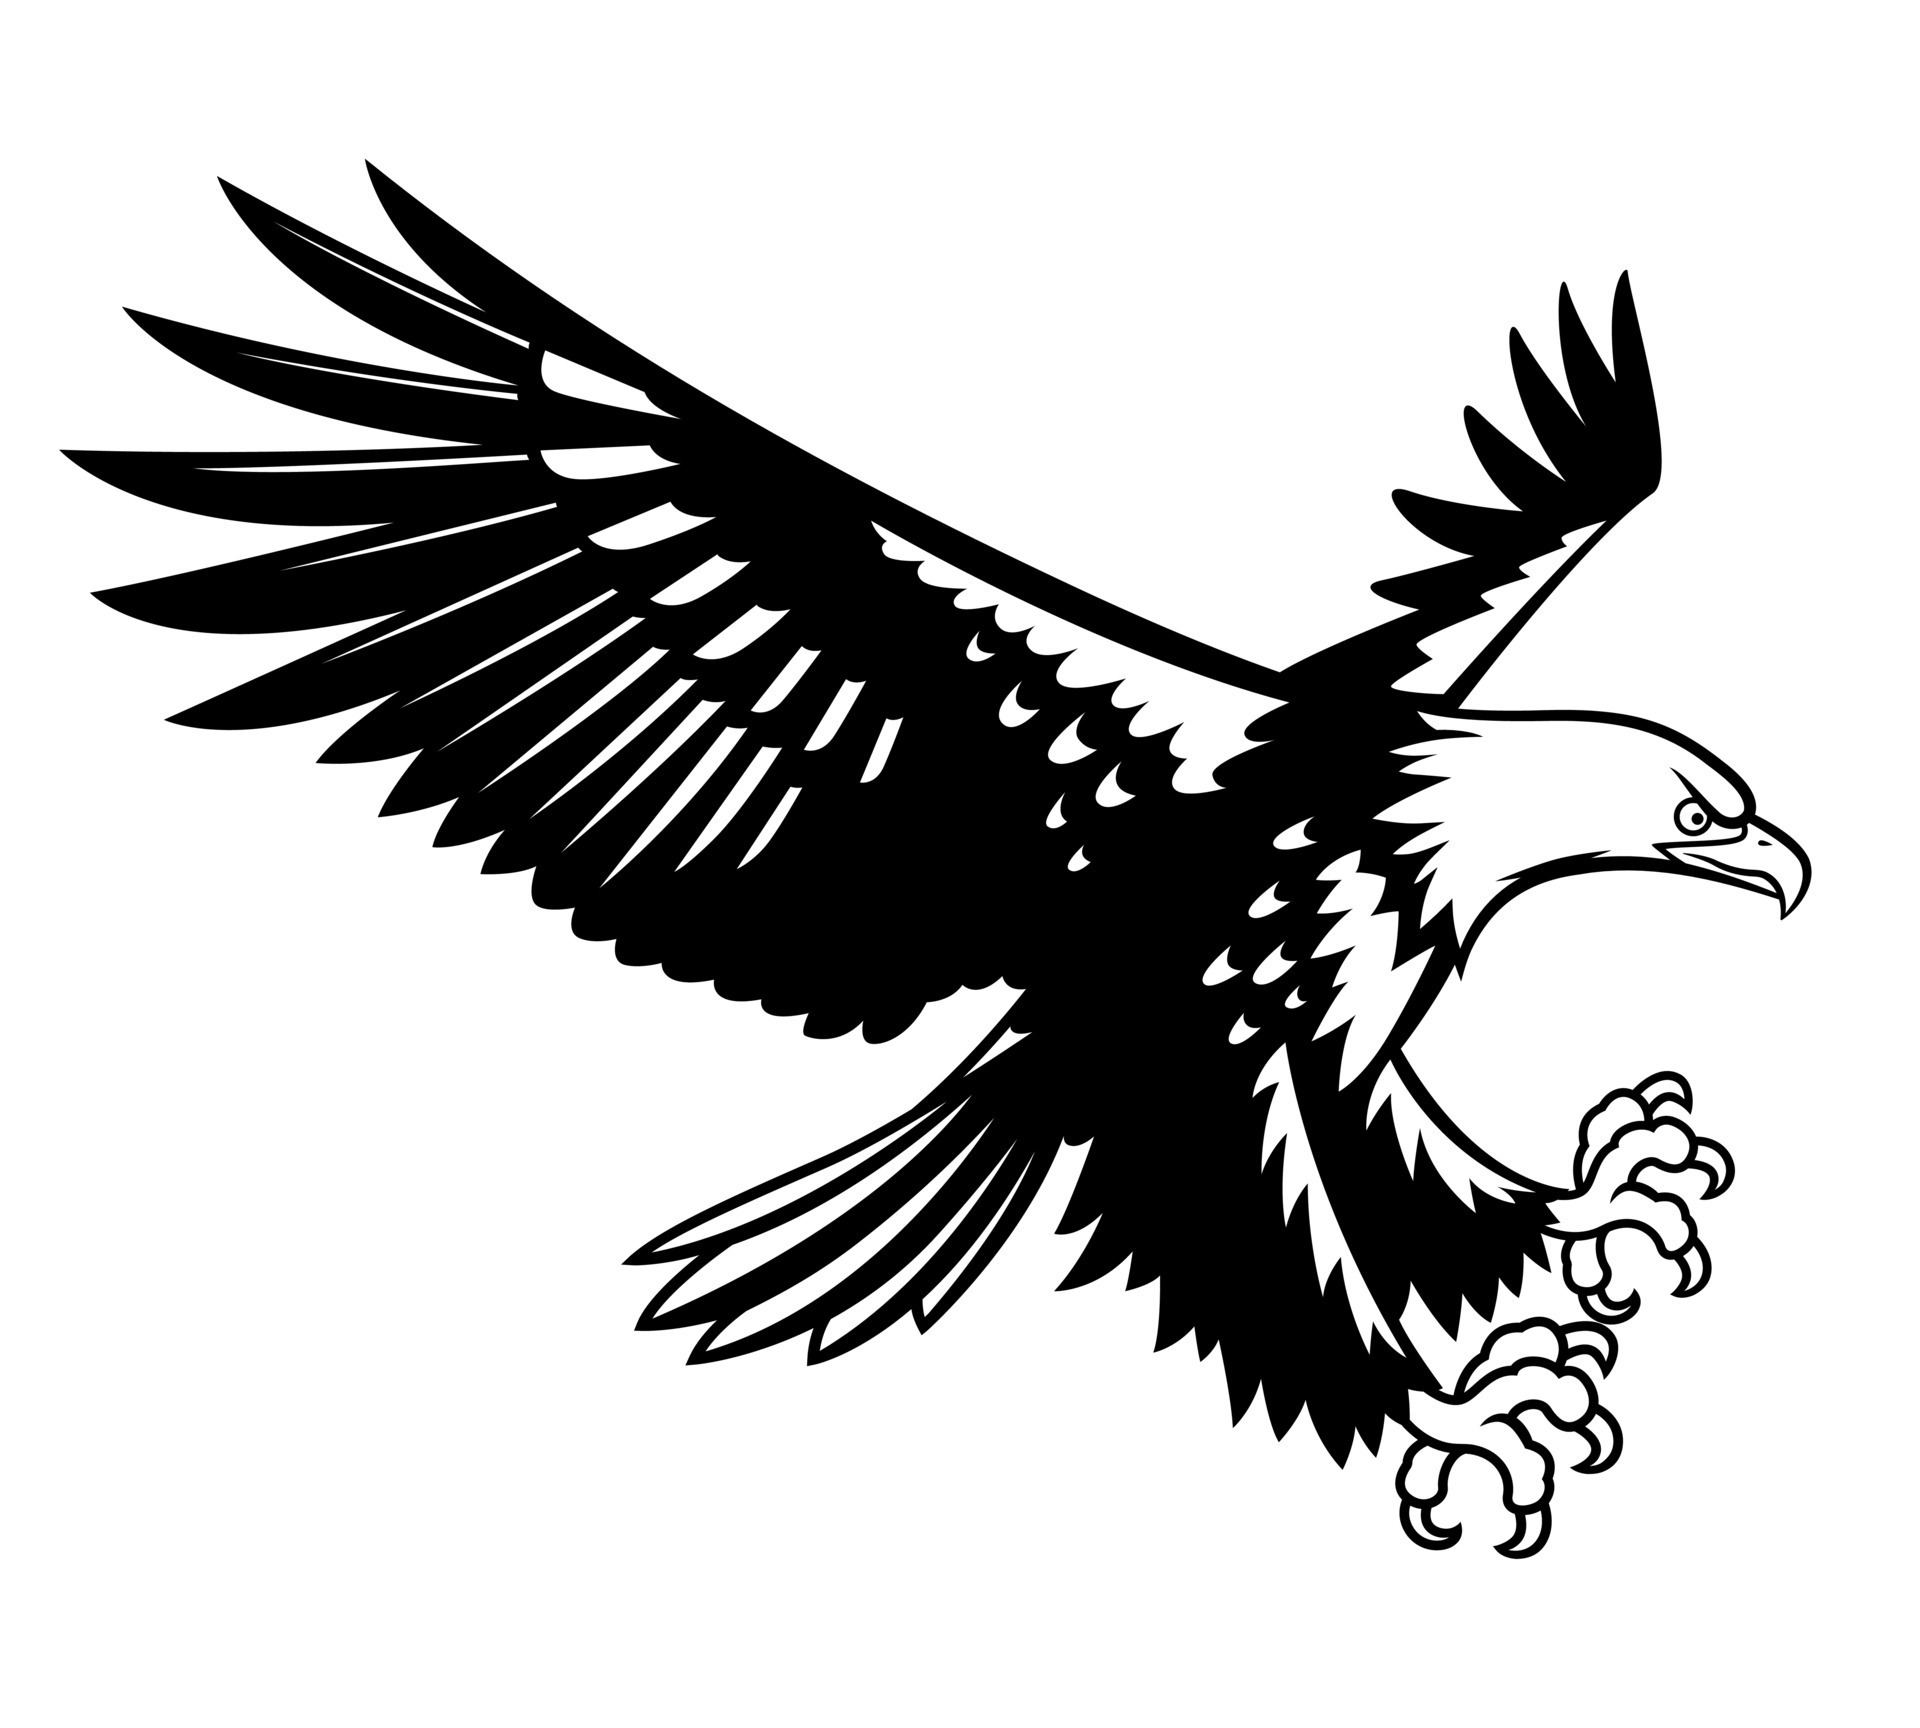 drawing a black eagle flying on white background 10826244 Vector